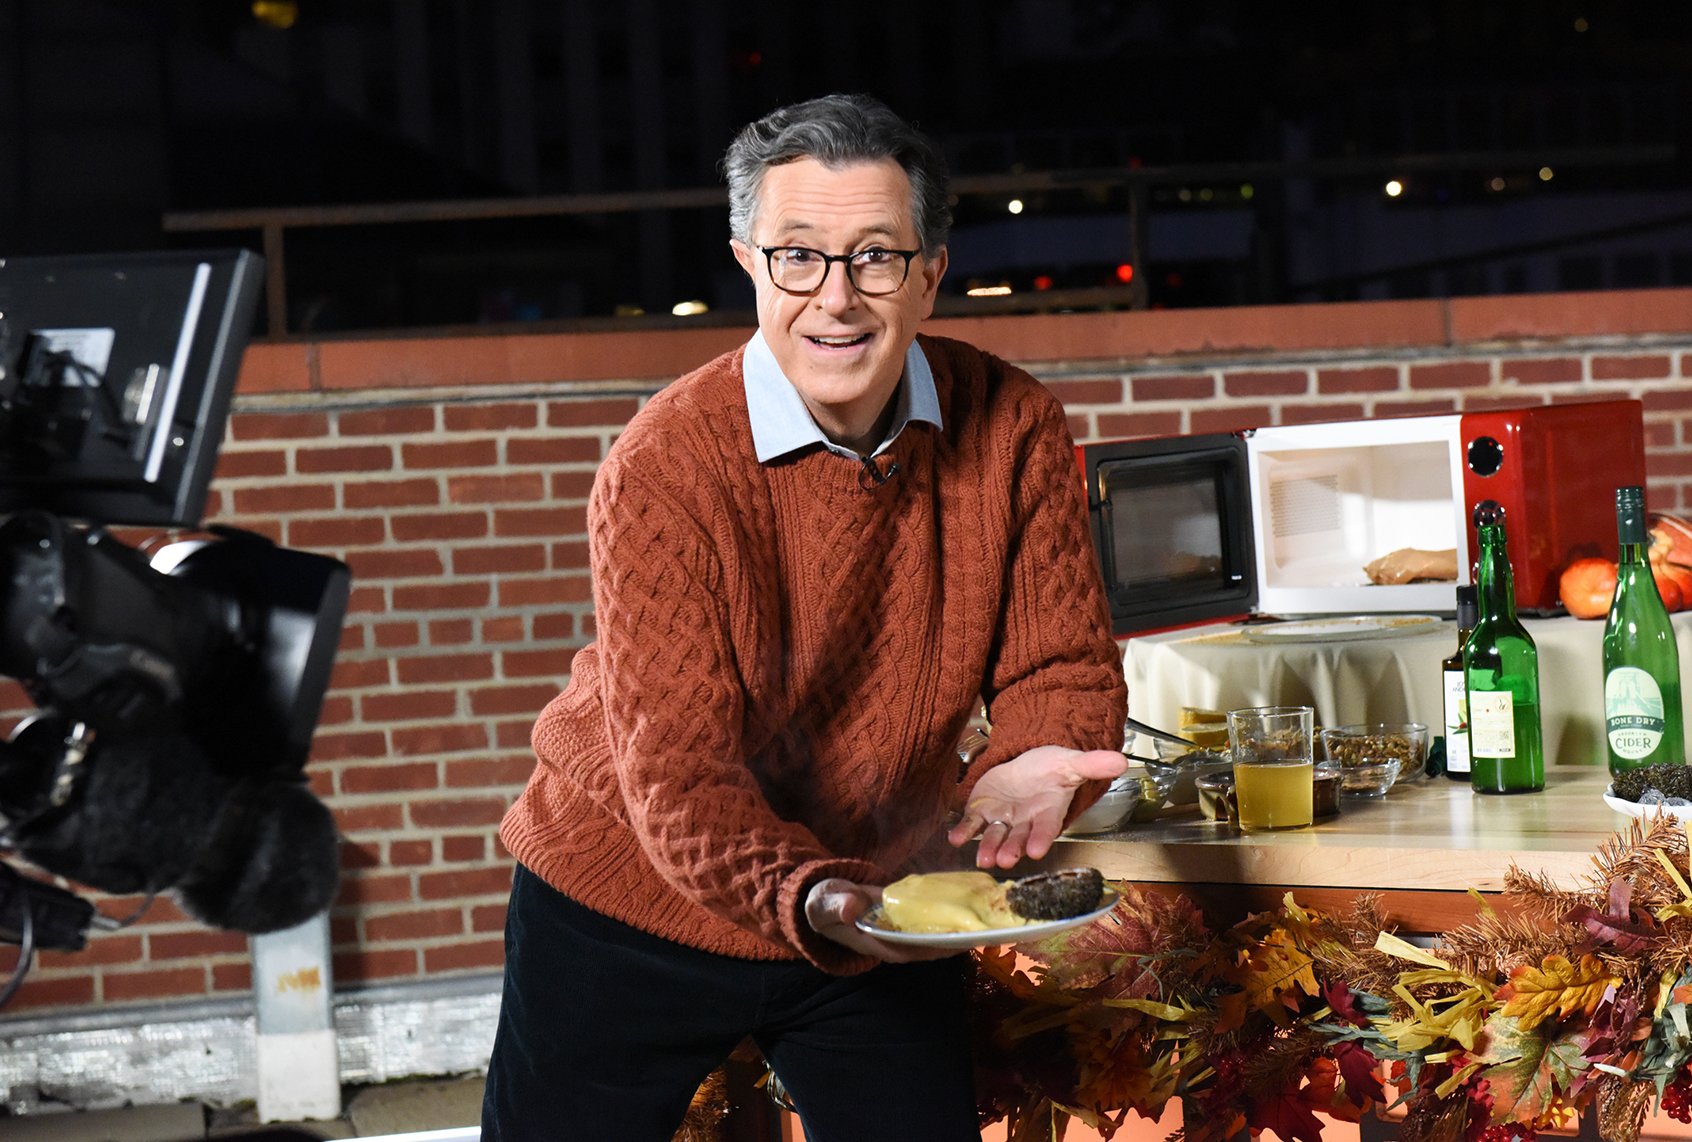 How Stephen Colbert’s defiant honesty helped me navigate the madness of 2020